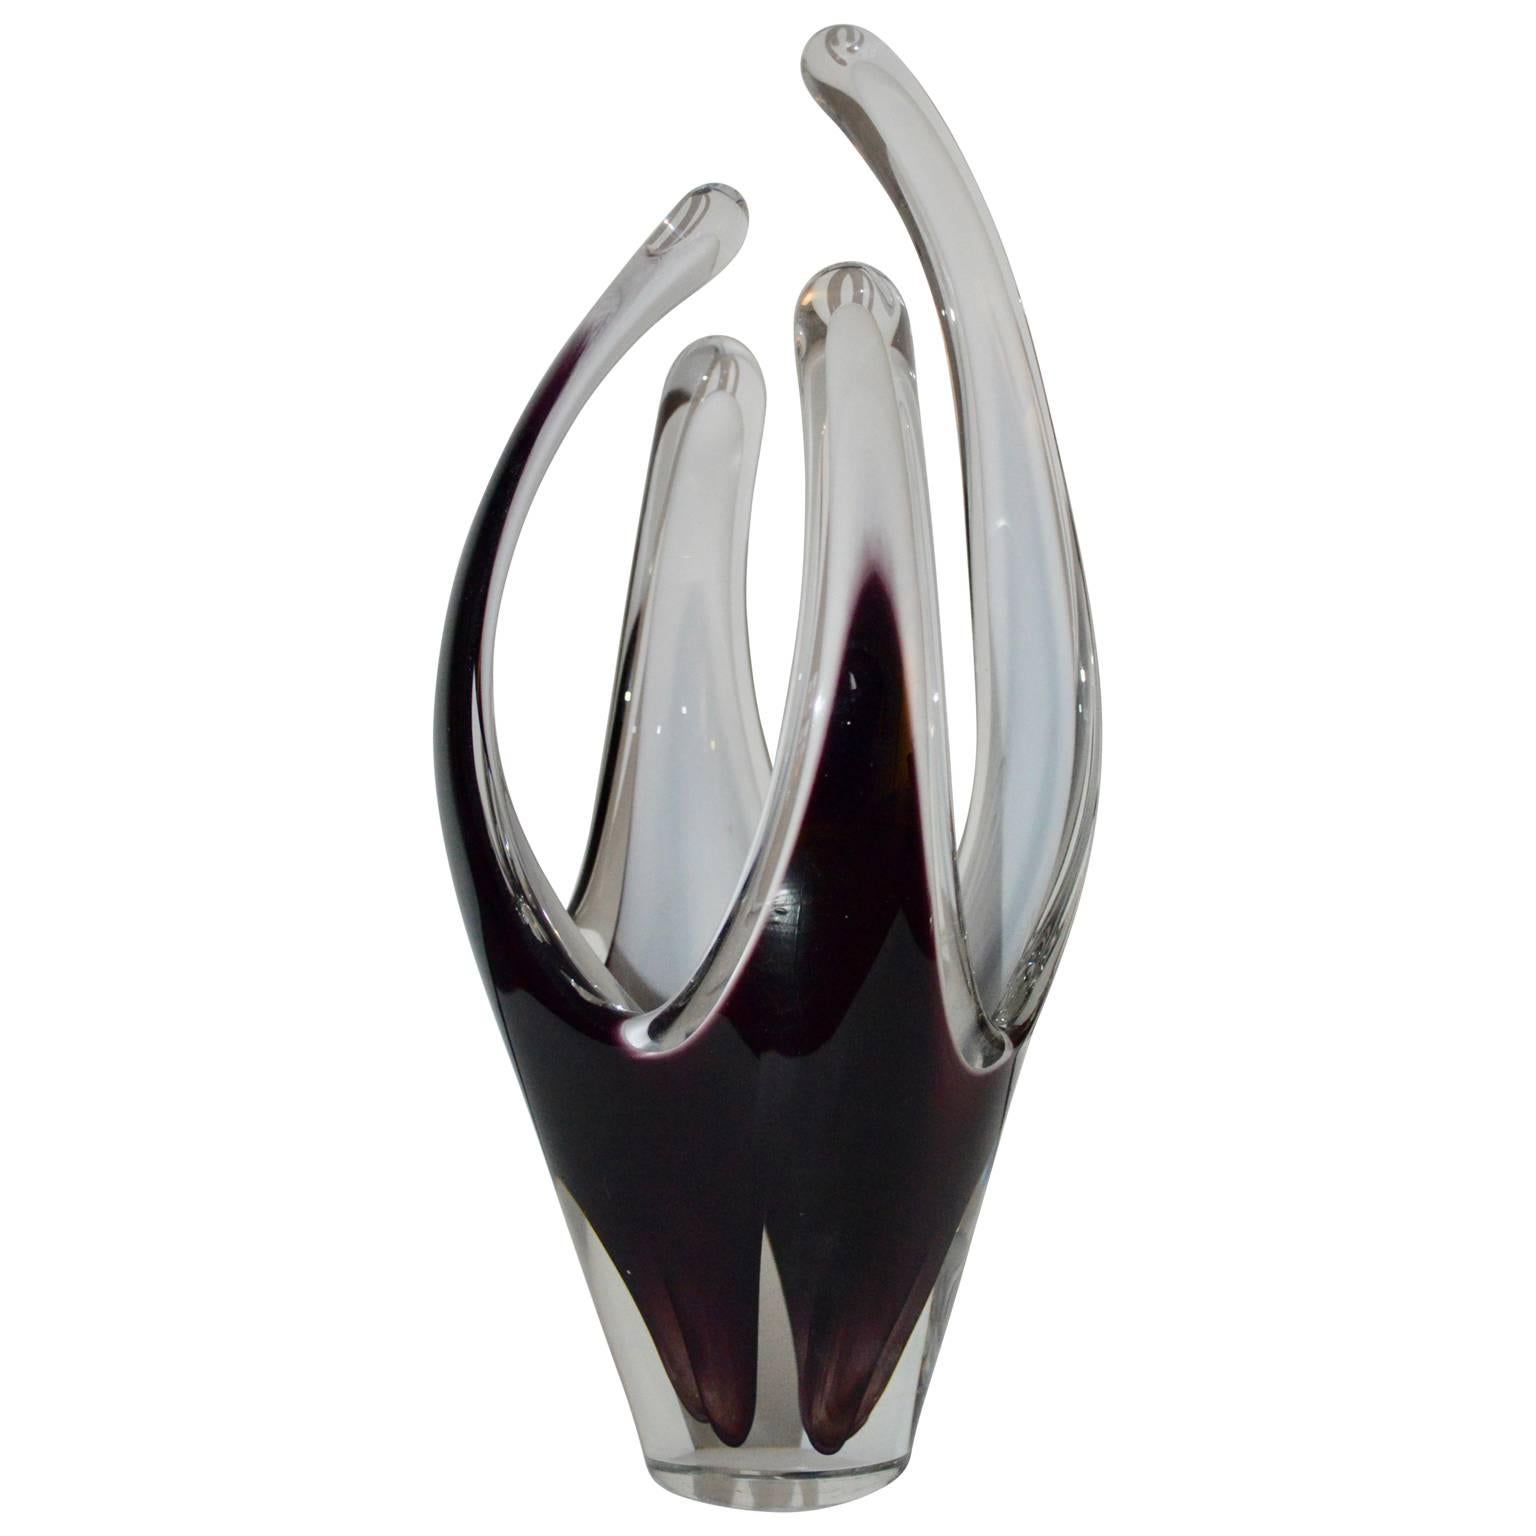 Mid-Century Modern Flygfors glass centerpiece from the range Coquille in dark purple and white.